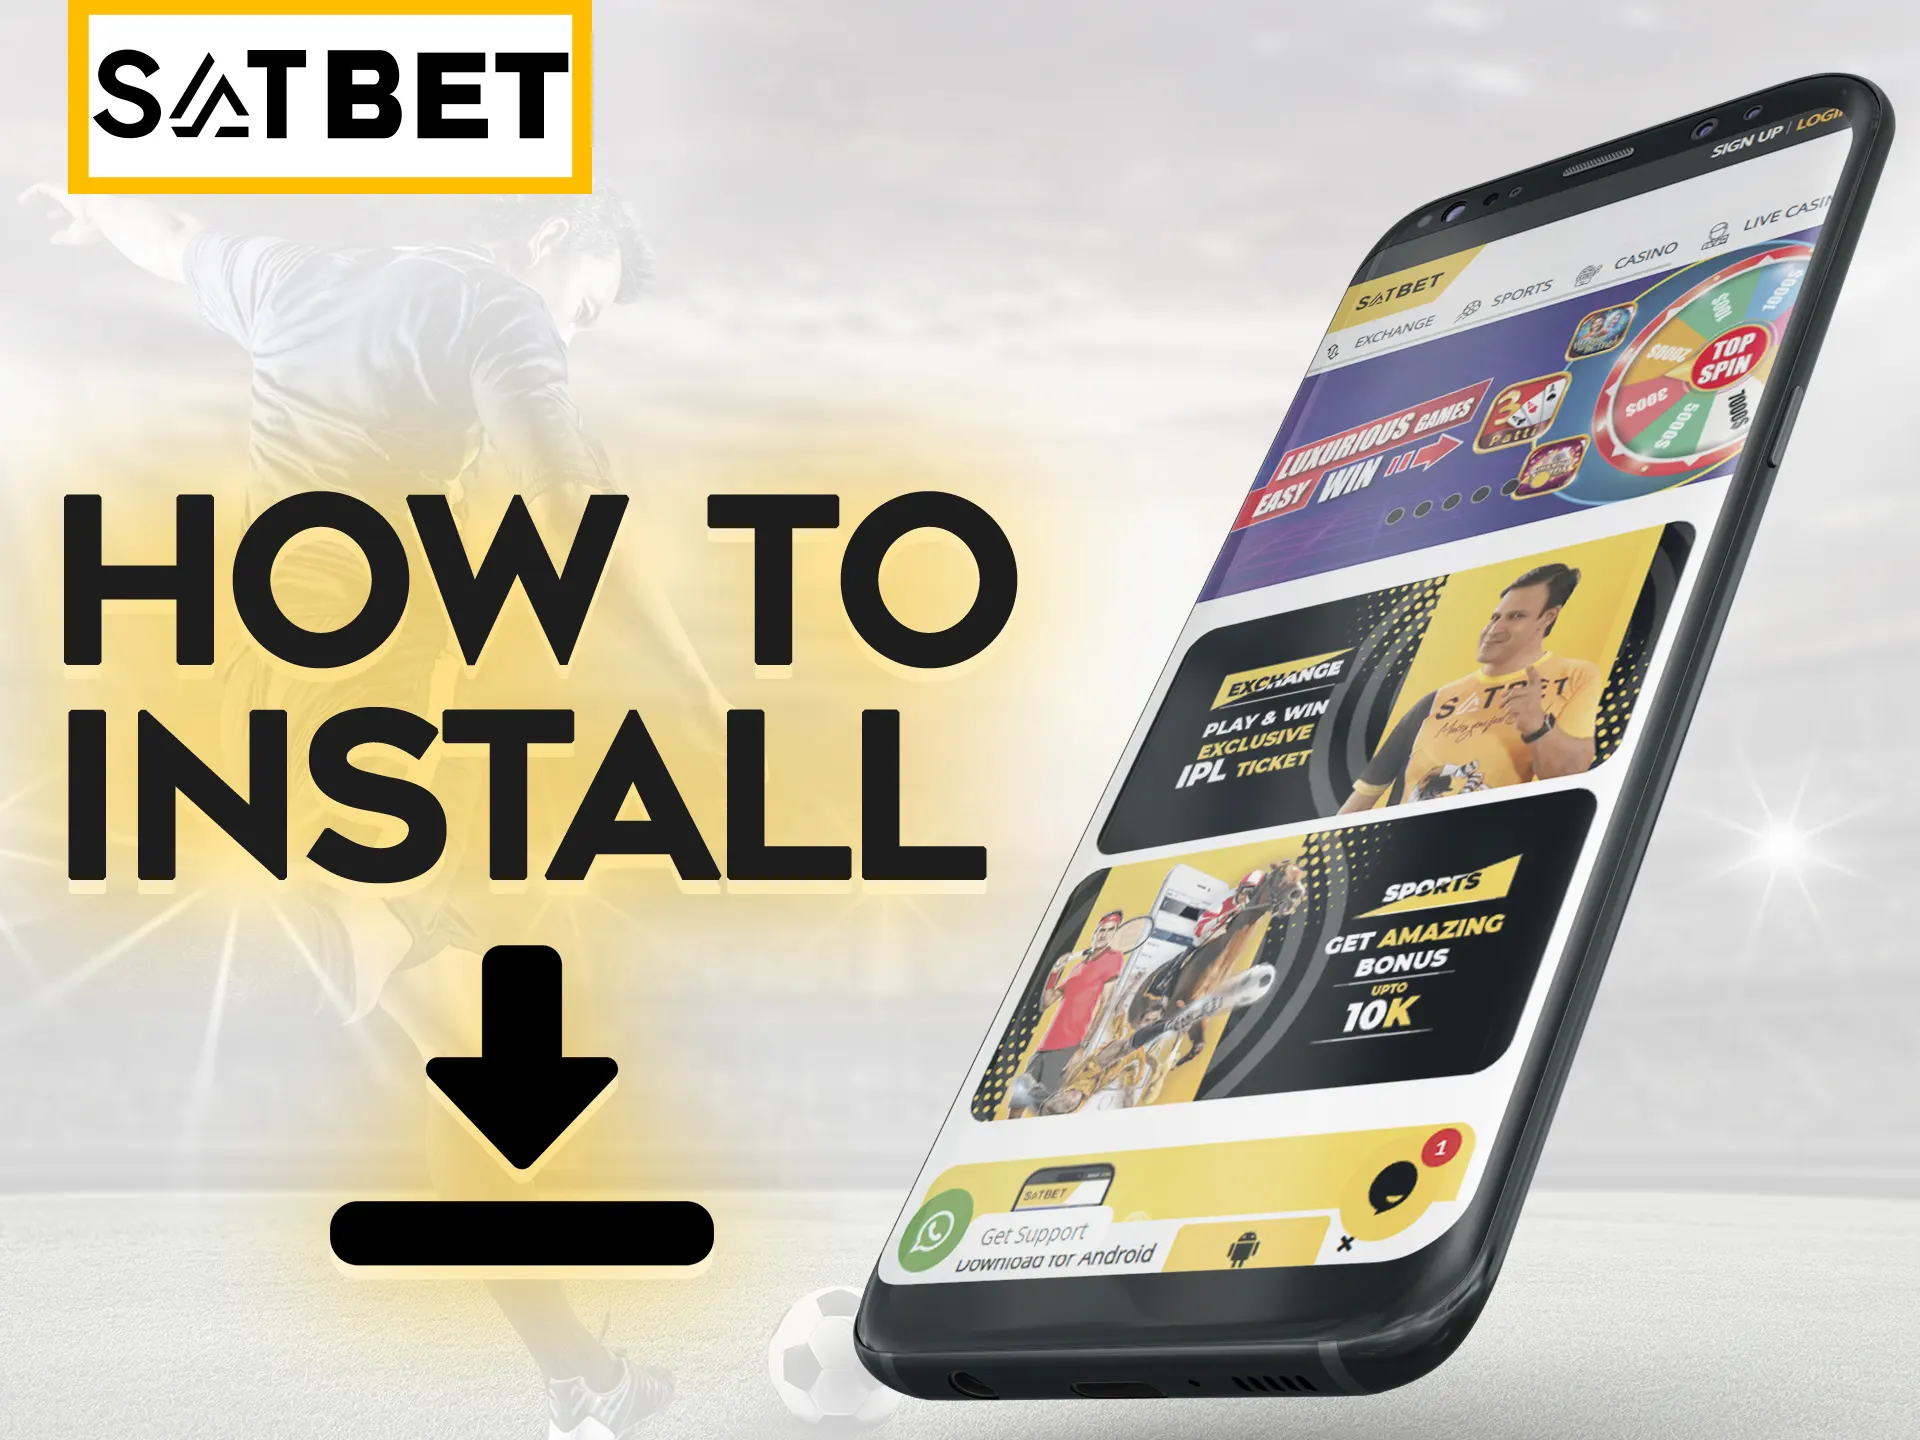 Install Satbet app by following simple steps.